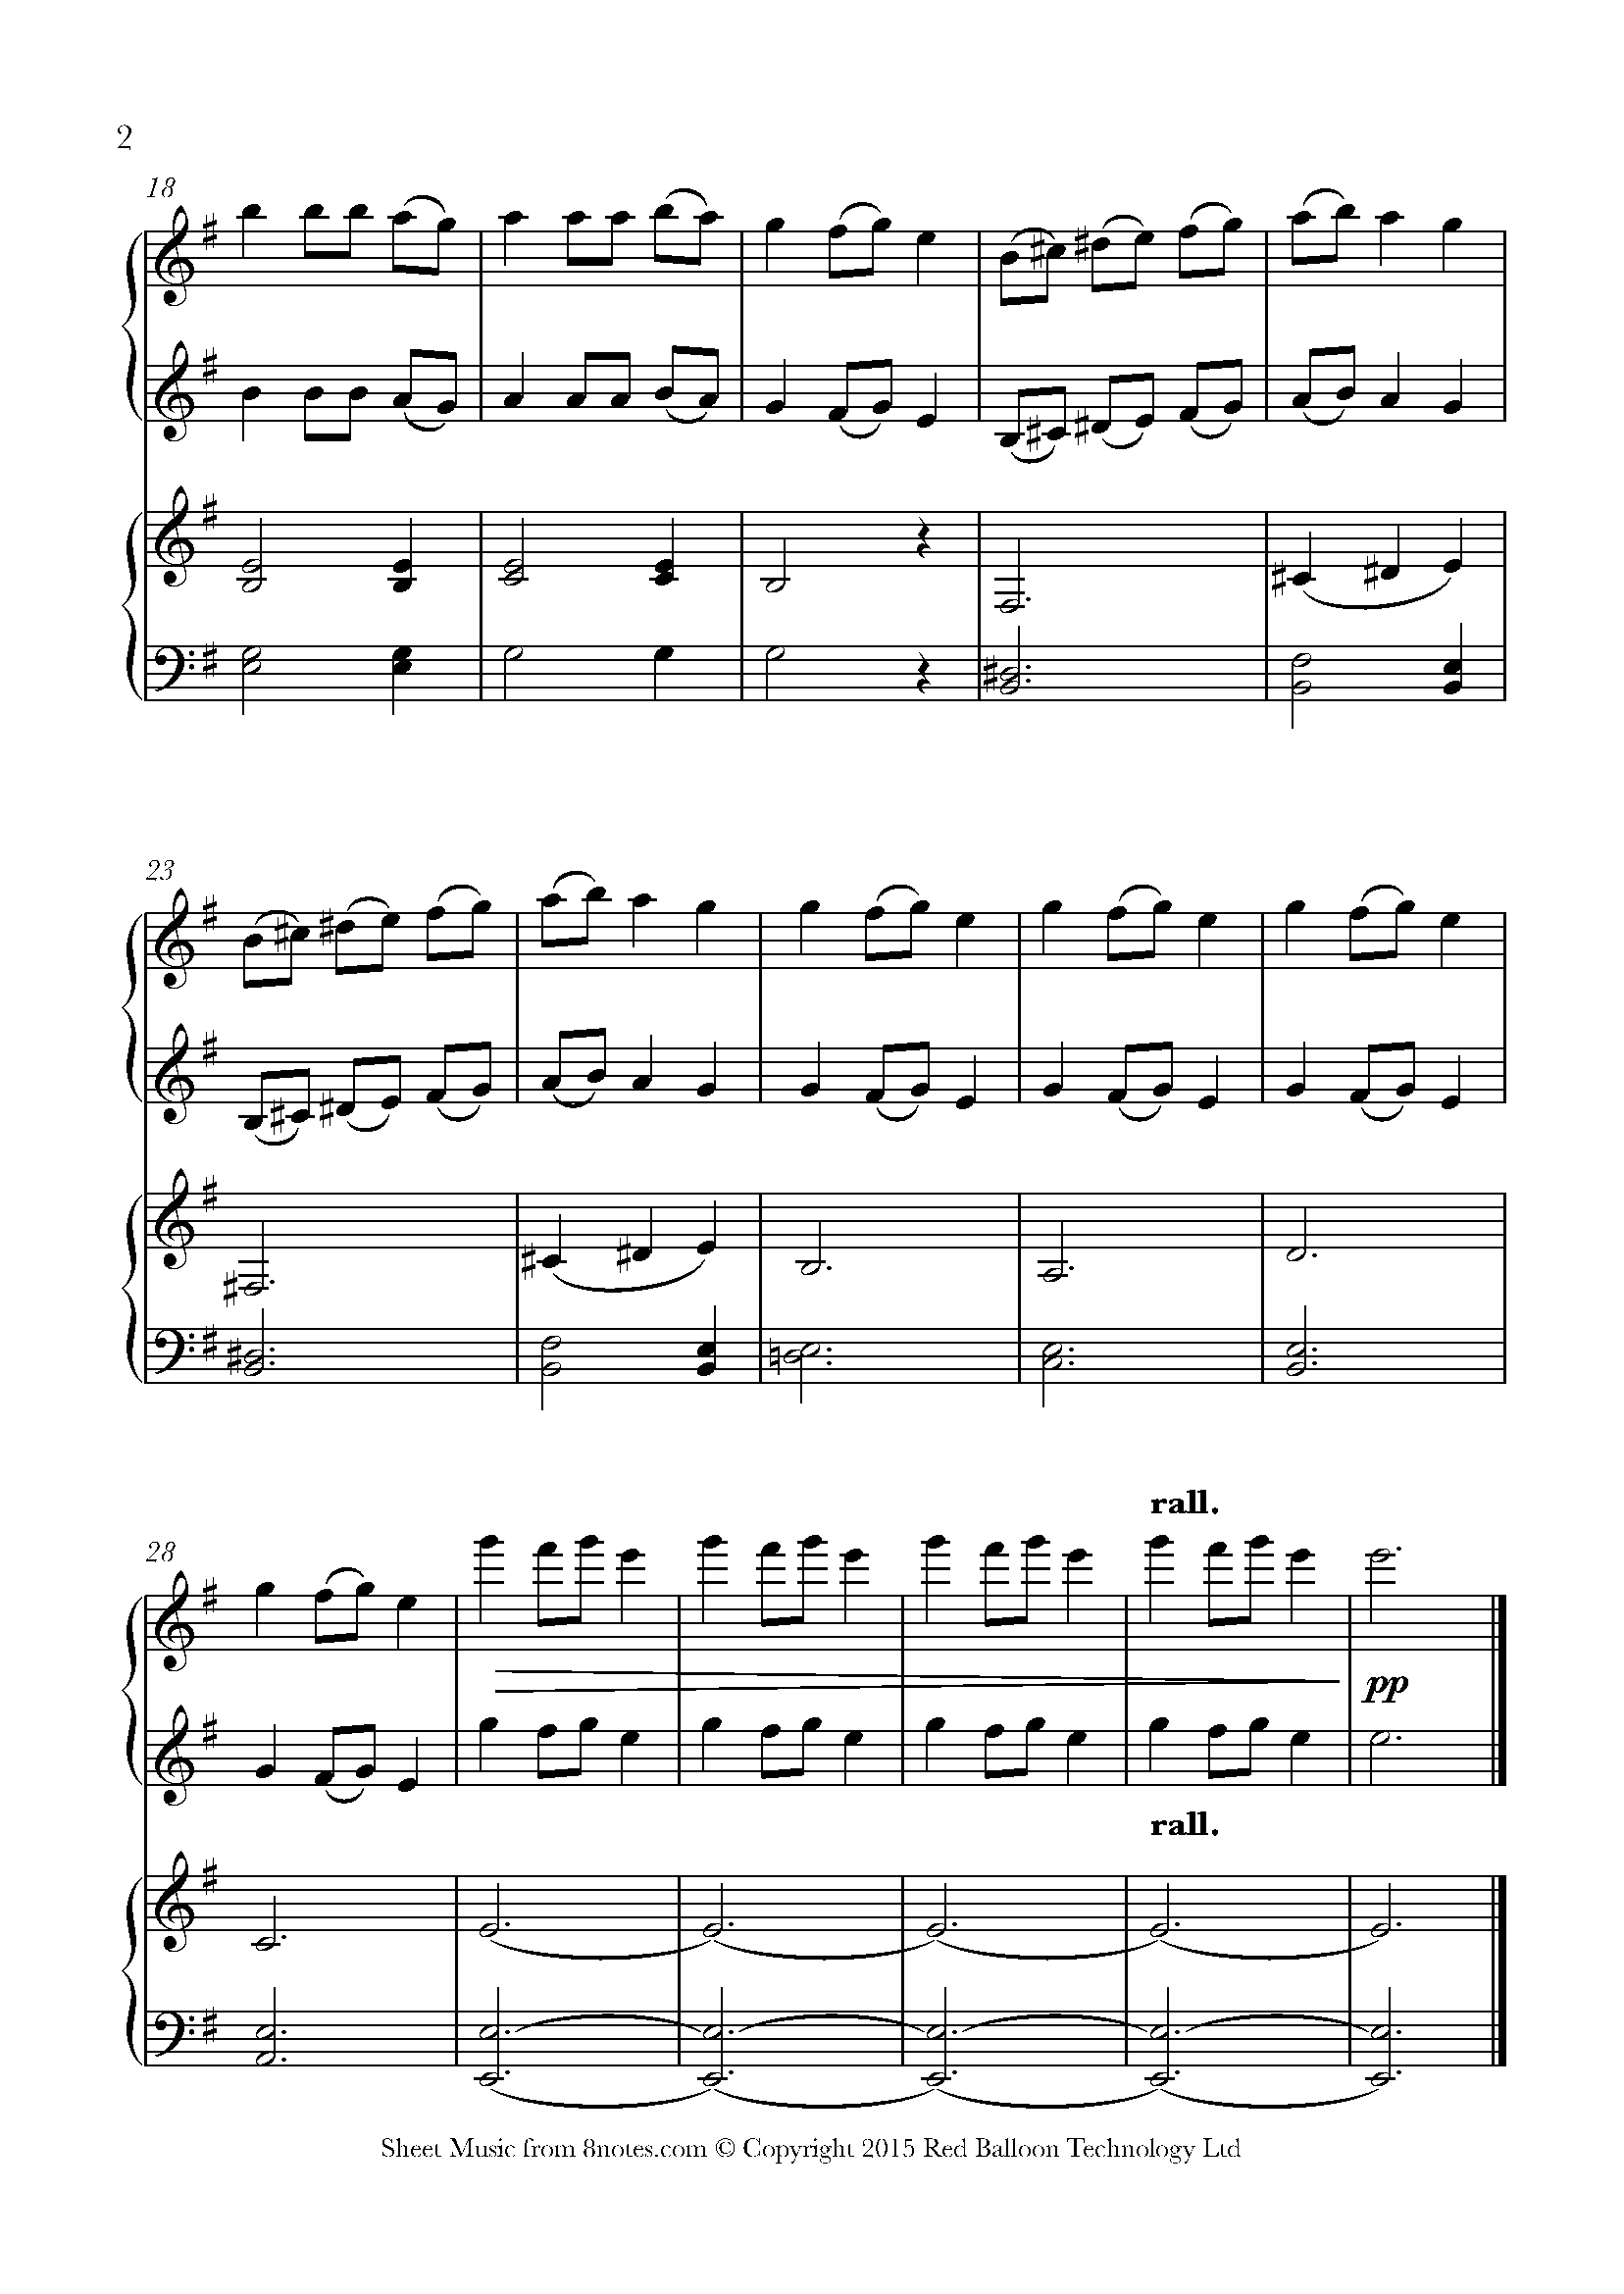 carol-of-the-bells-sheet-music-for-piano-duet-8notes